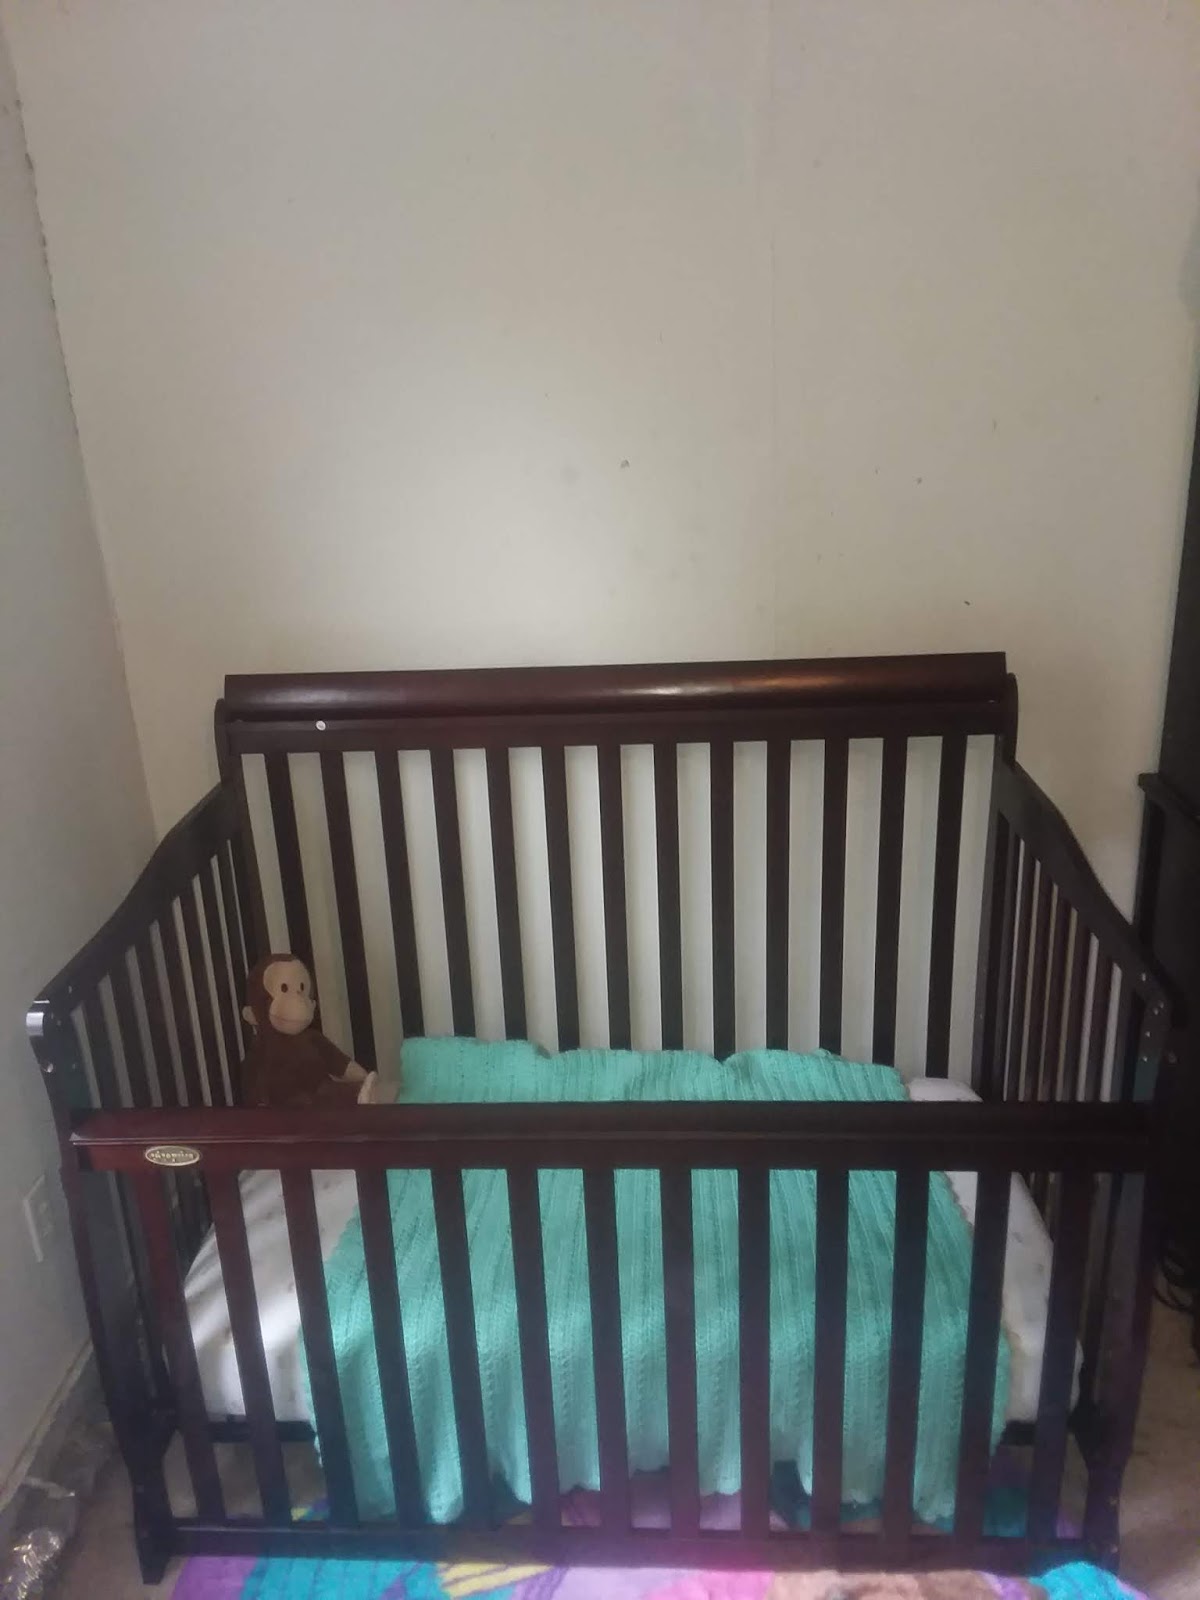 Give Your Baby The Best With The Ashton 5 In 1 Convertible Crib Espresso Chitchatmom